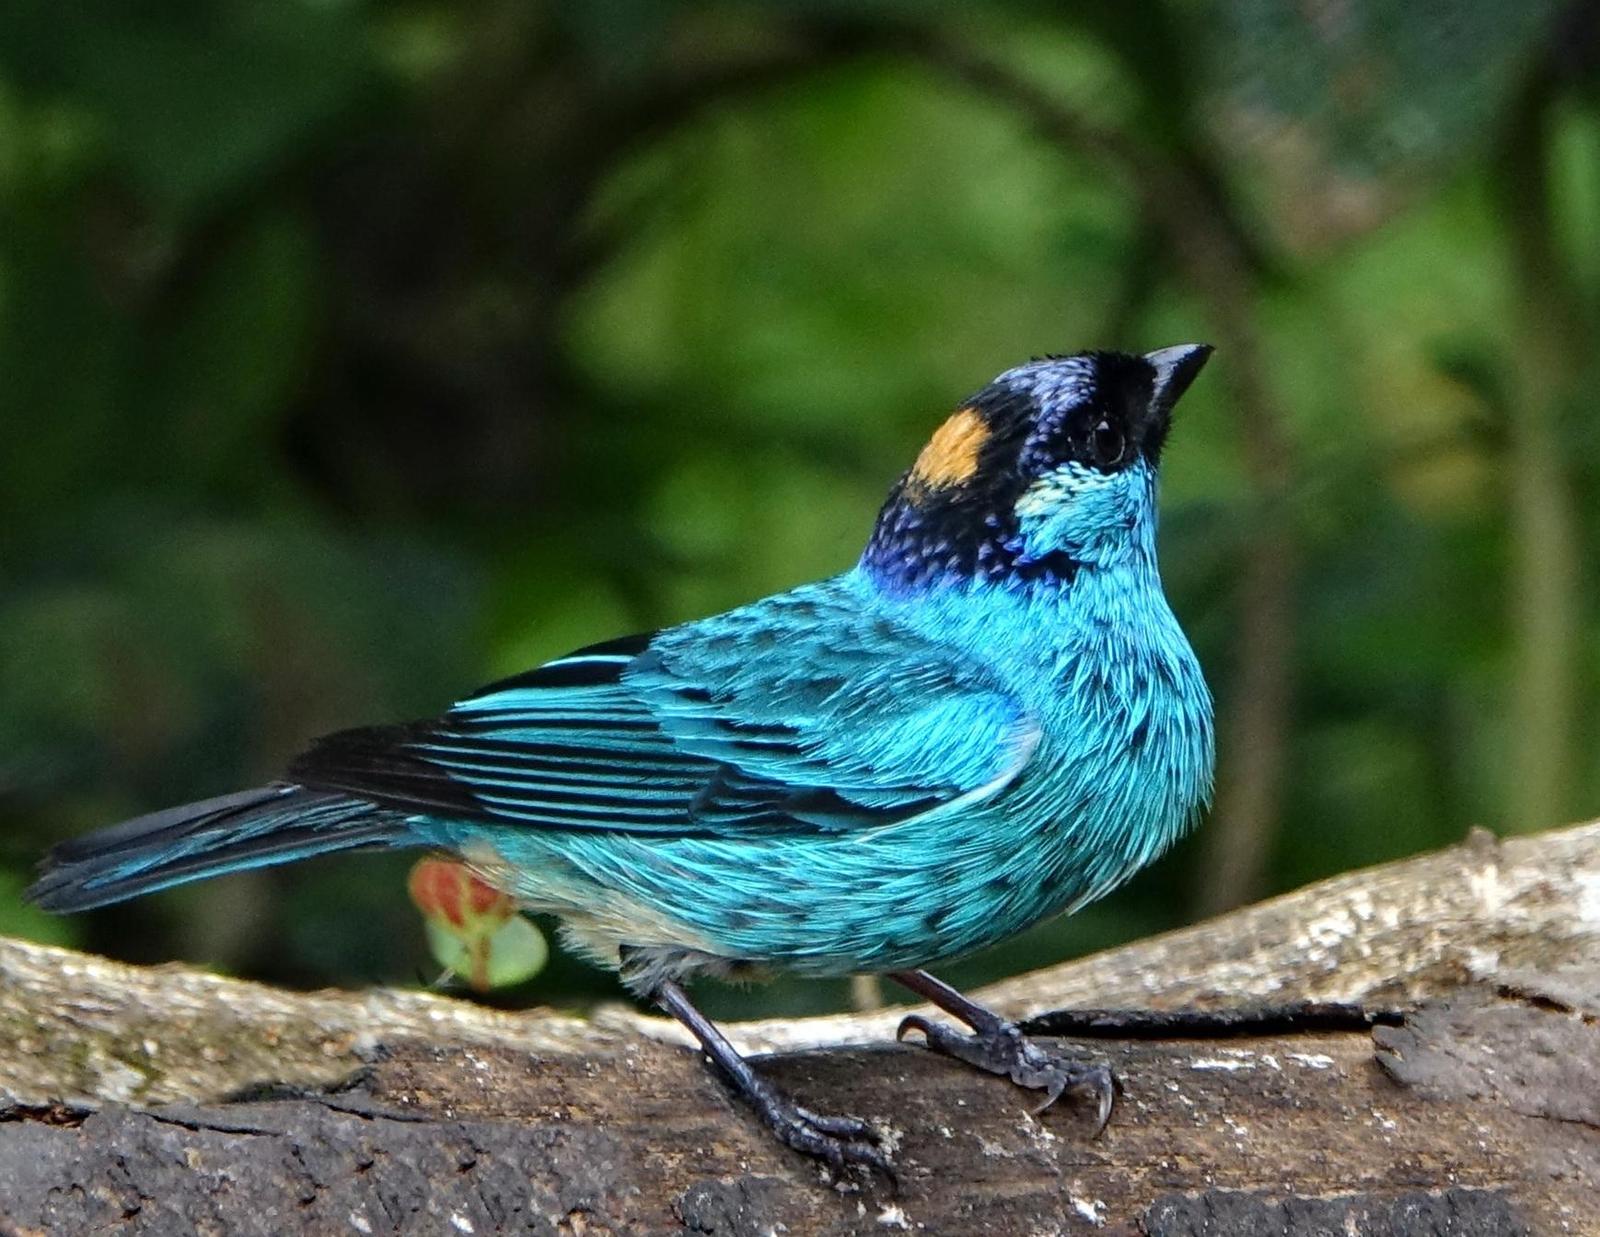 Golden-naped Tanager Photo by Doug Swartz